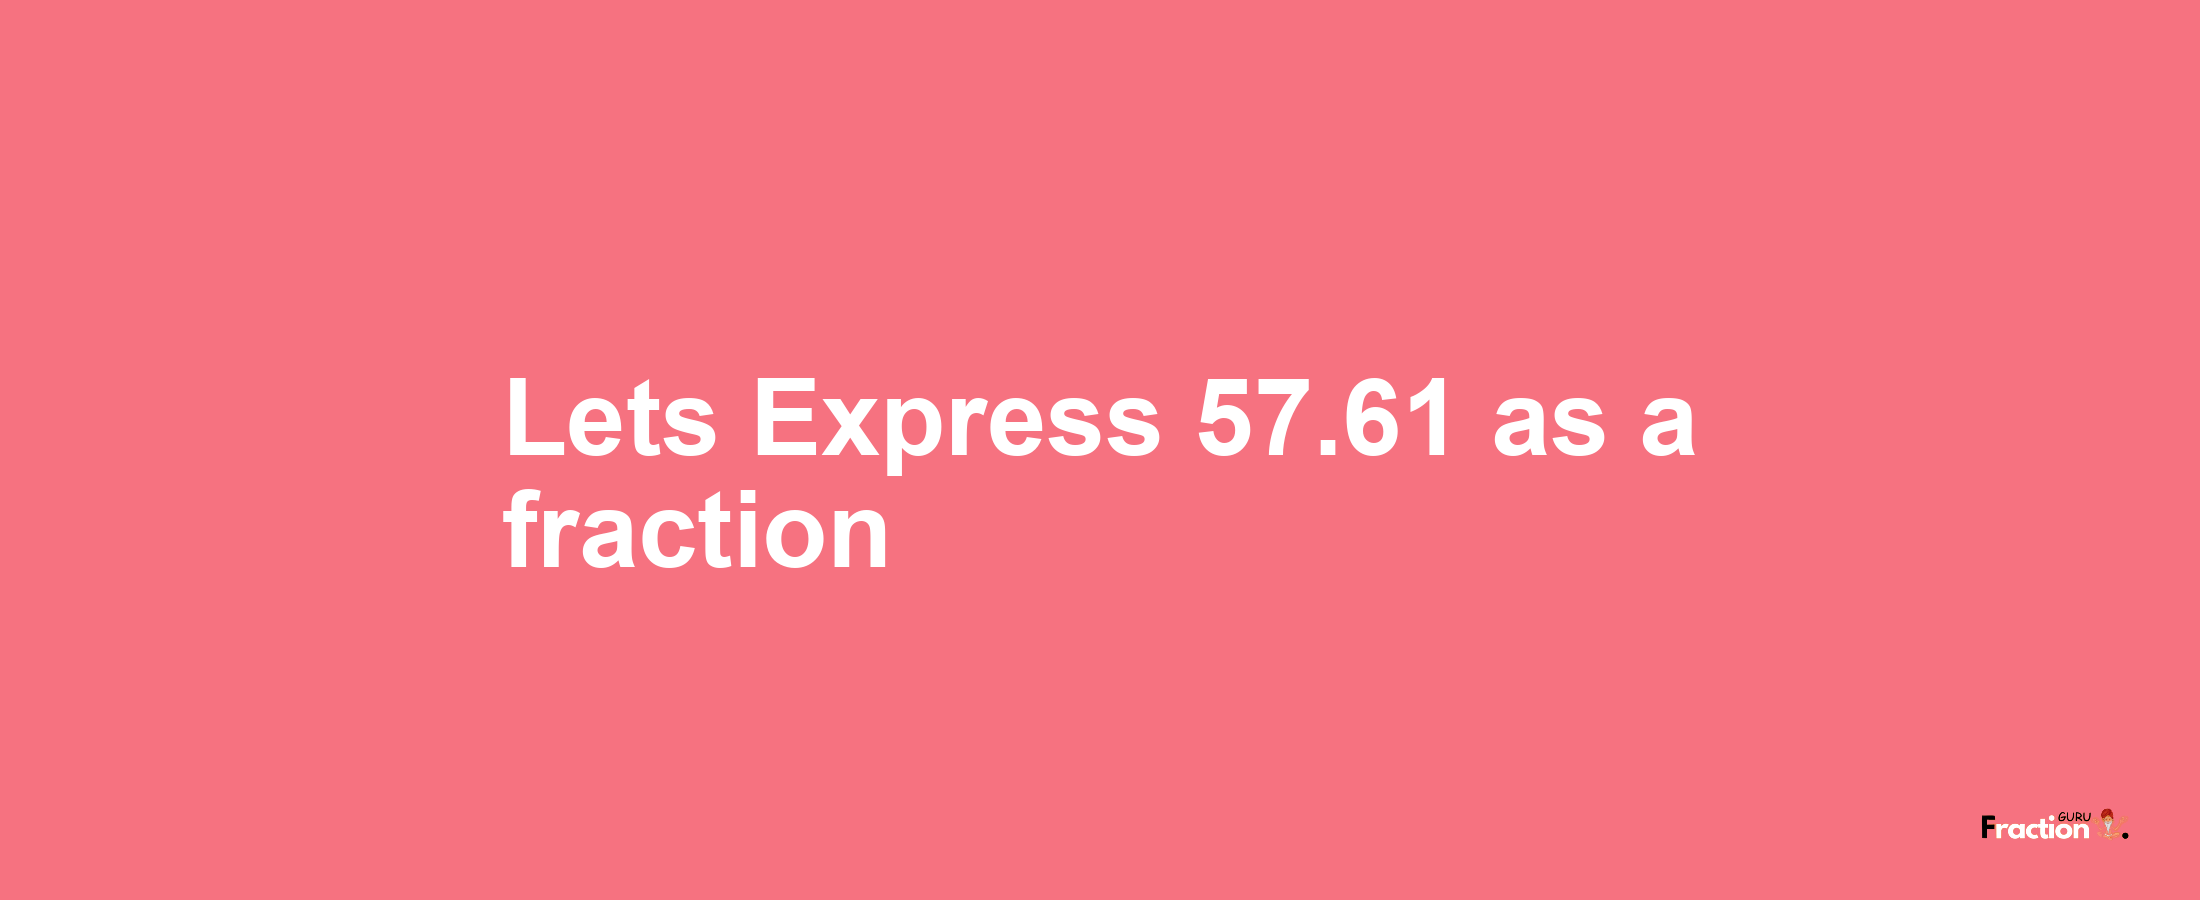 Lets Express 57.61 as afraction